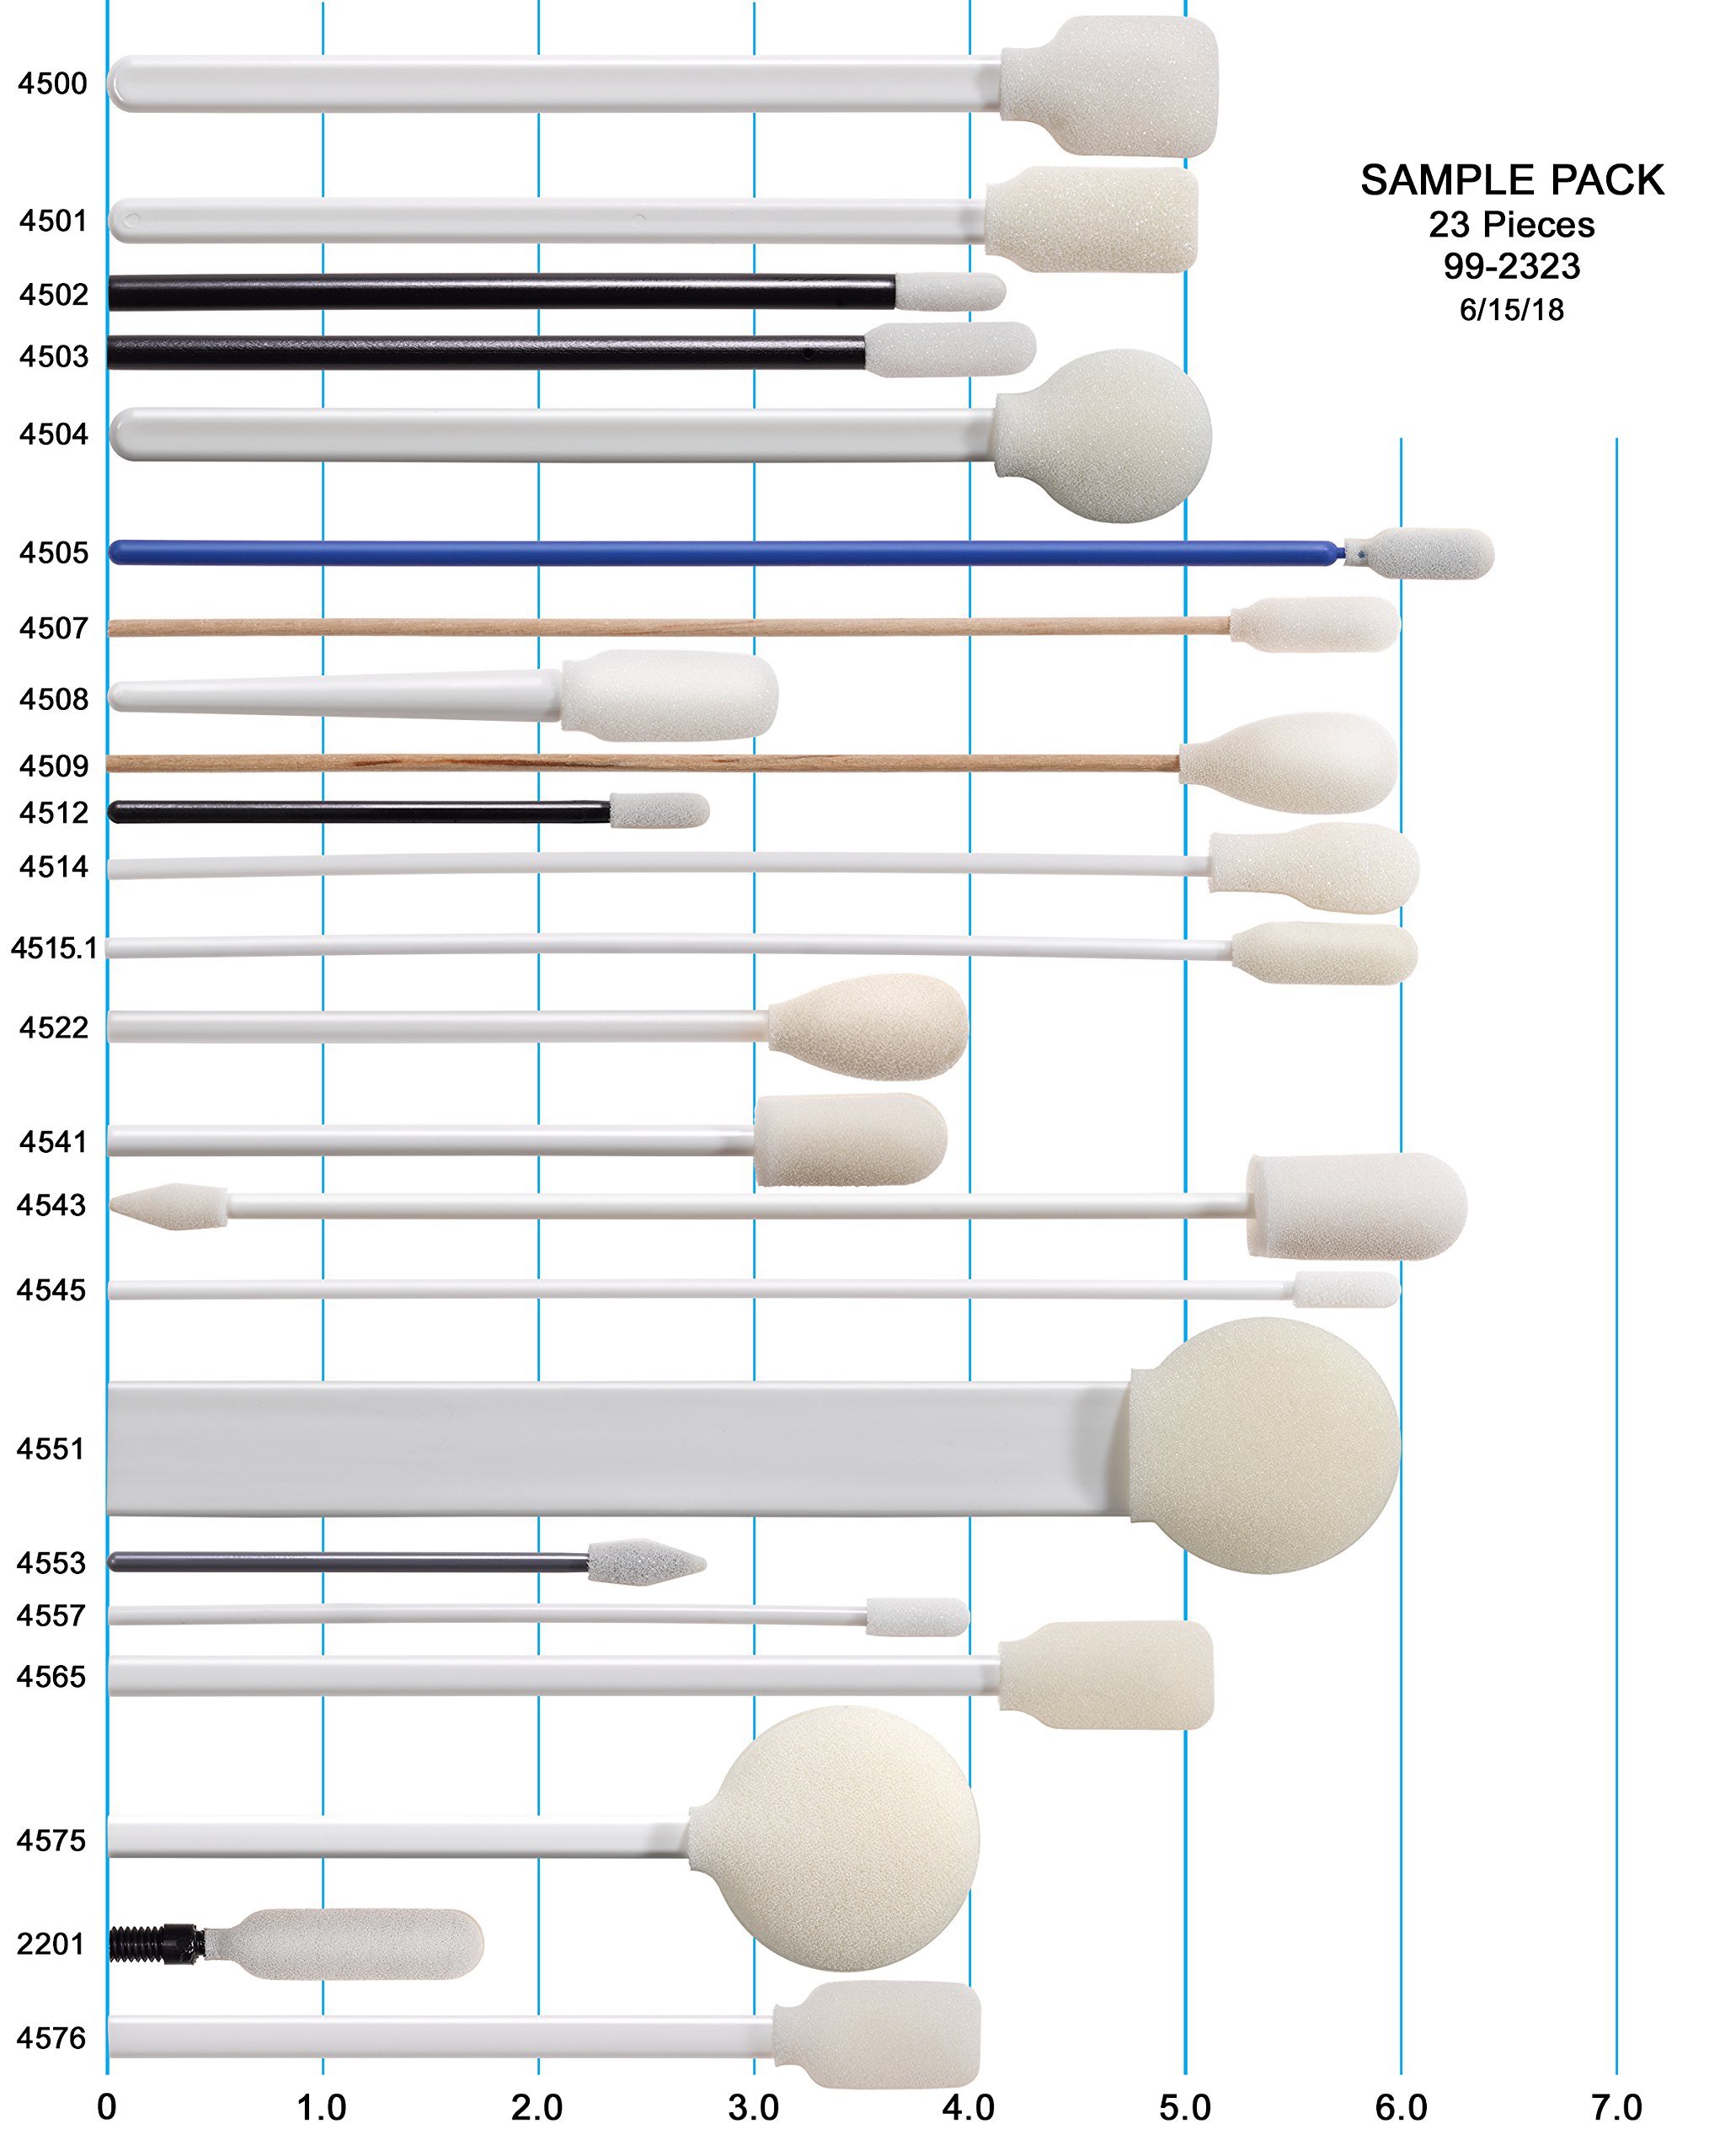 Mixed Bag of Best Selling Foam Swabs by Swab-its - All Shapes and Sizes Included - Made in The USA